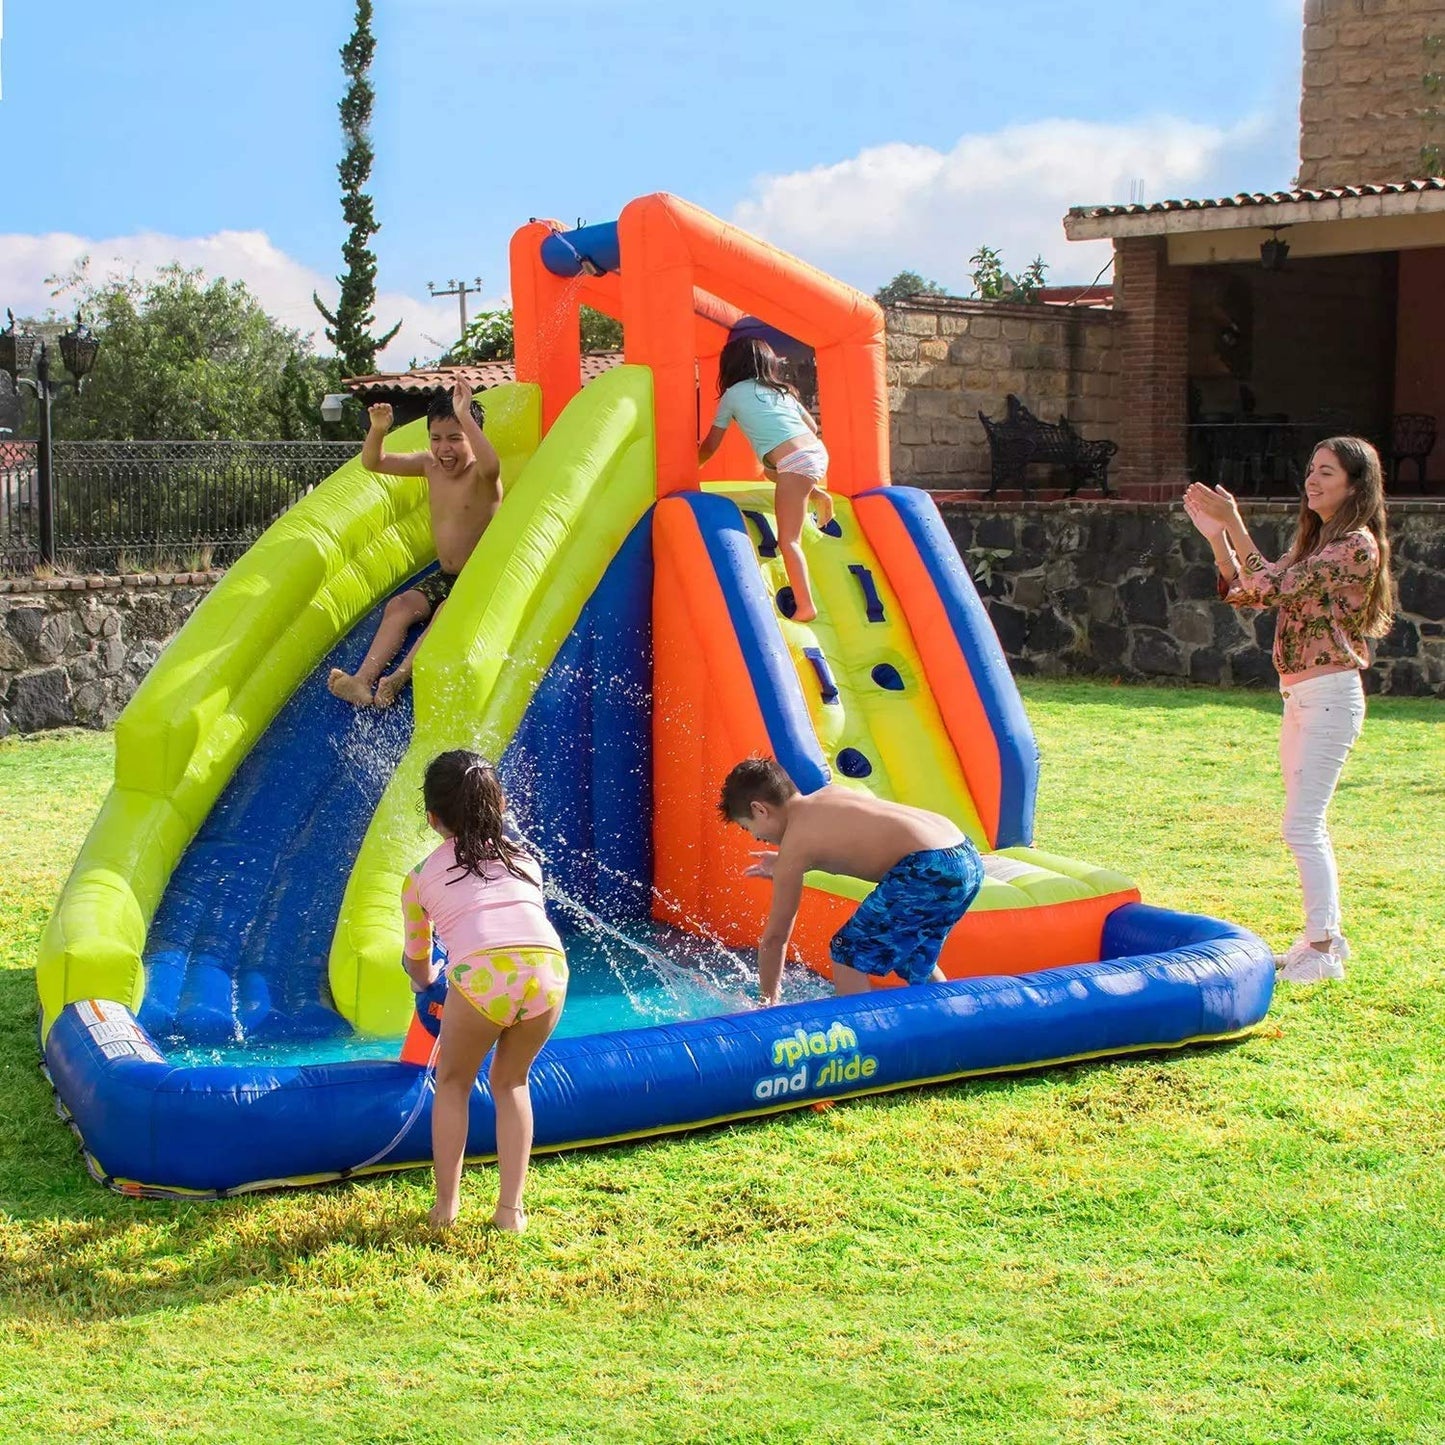 Corson Tools Splash and Slide Climb Inflatable Water Blob, Climbing Wall, and Pool Area | Outdoor Summer Fun for Kids & Families with Air Blower My First Waterslide